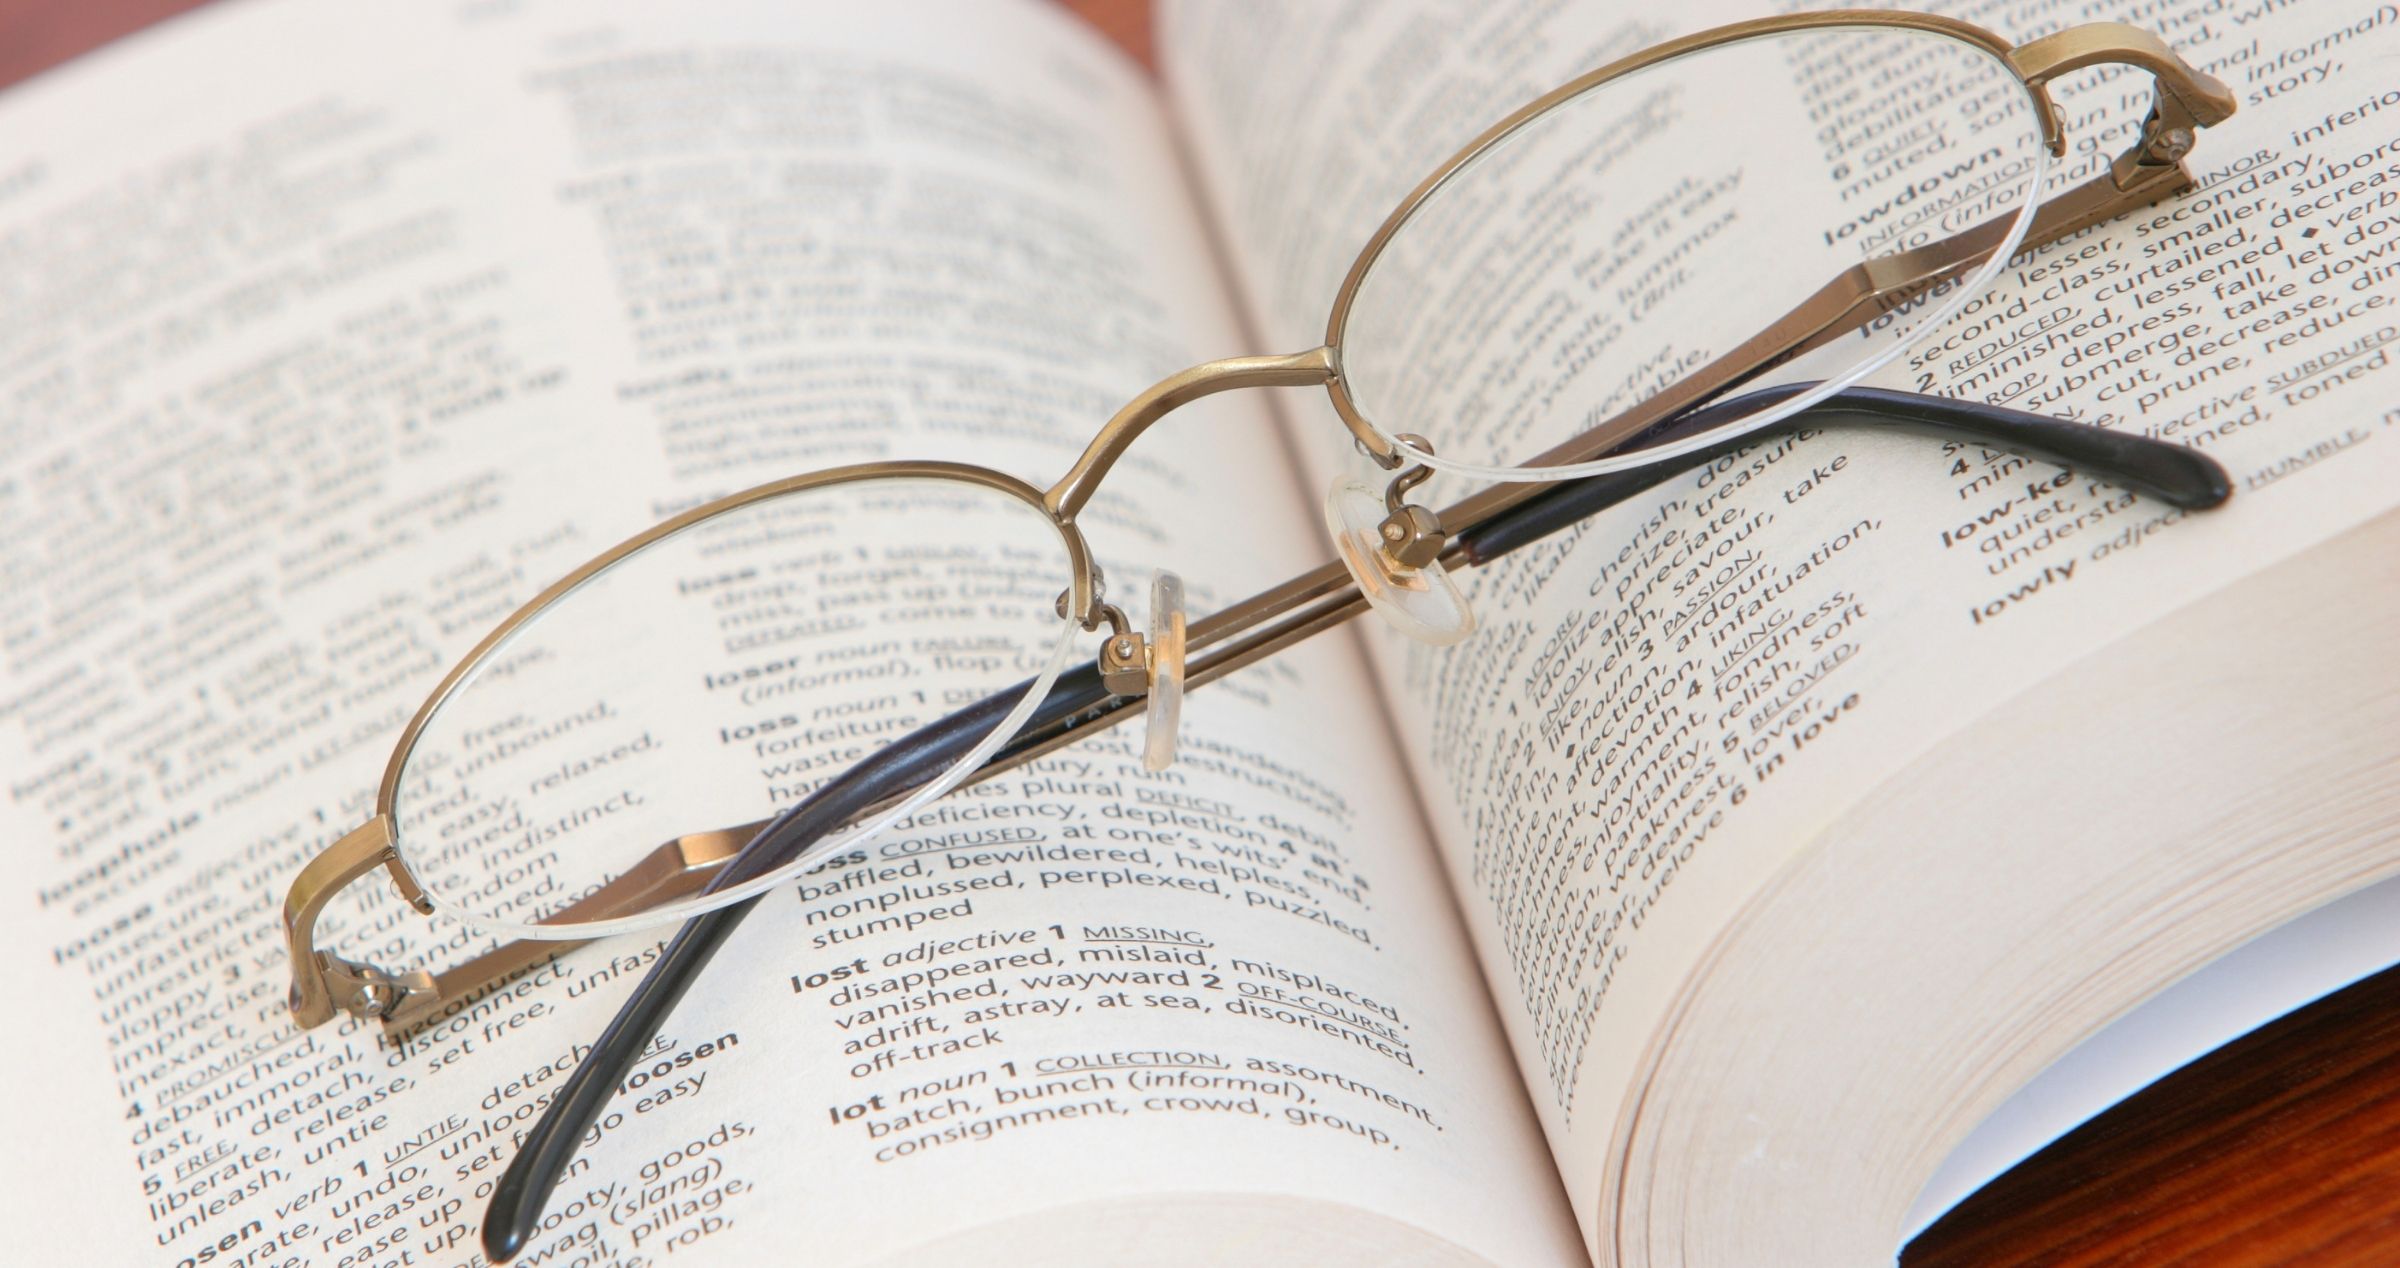 Image of folded reading glasses sitting on an open book